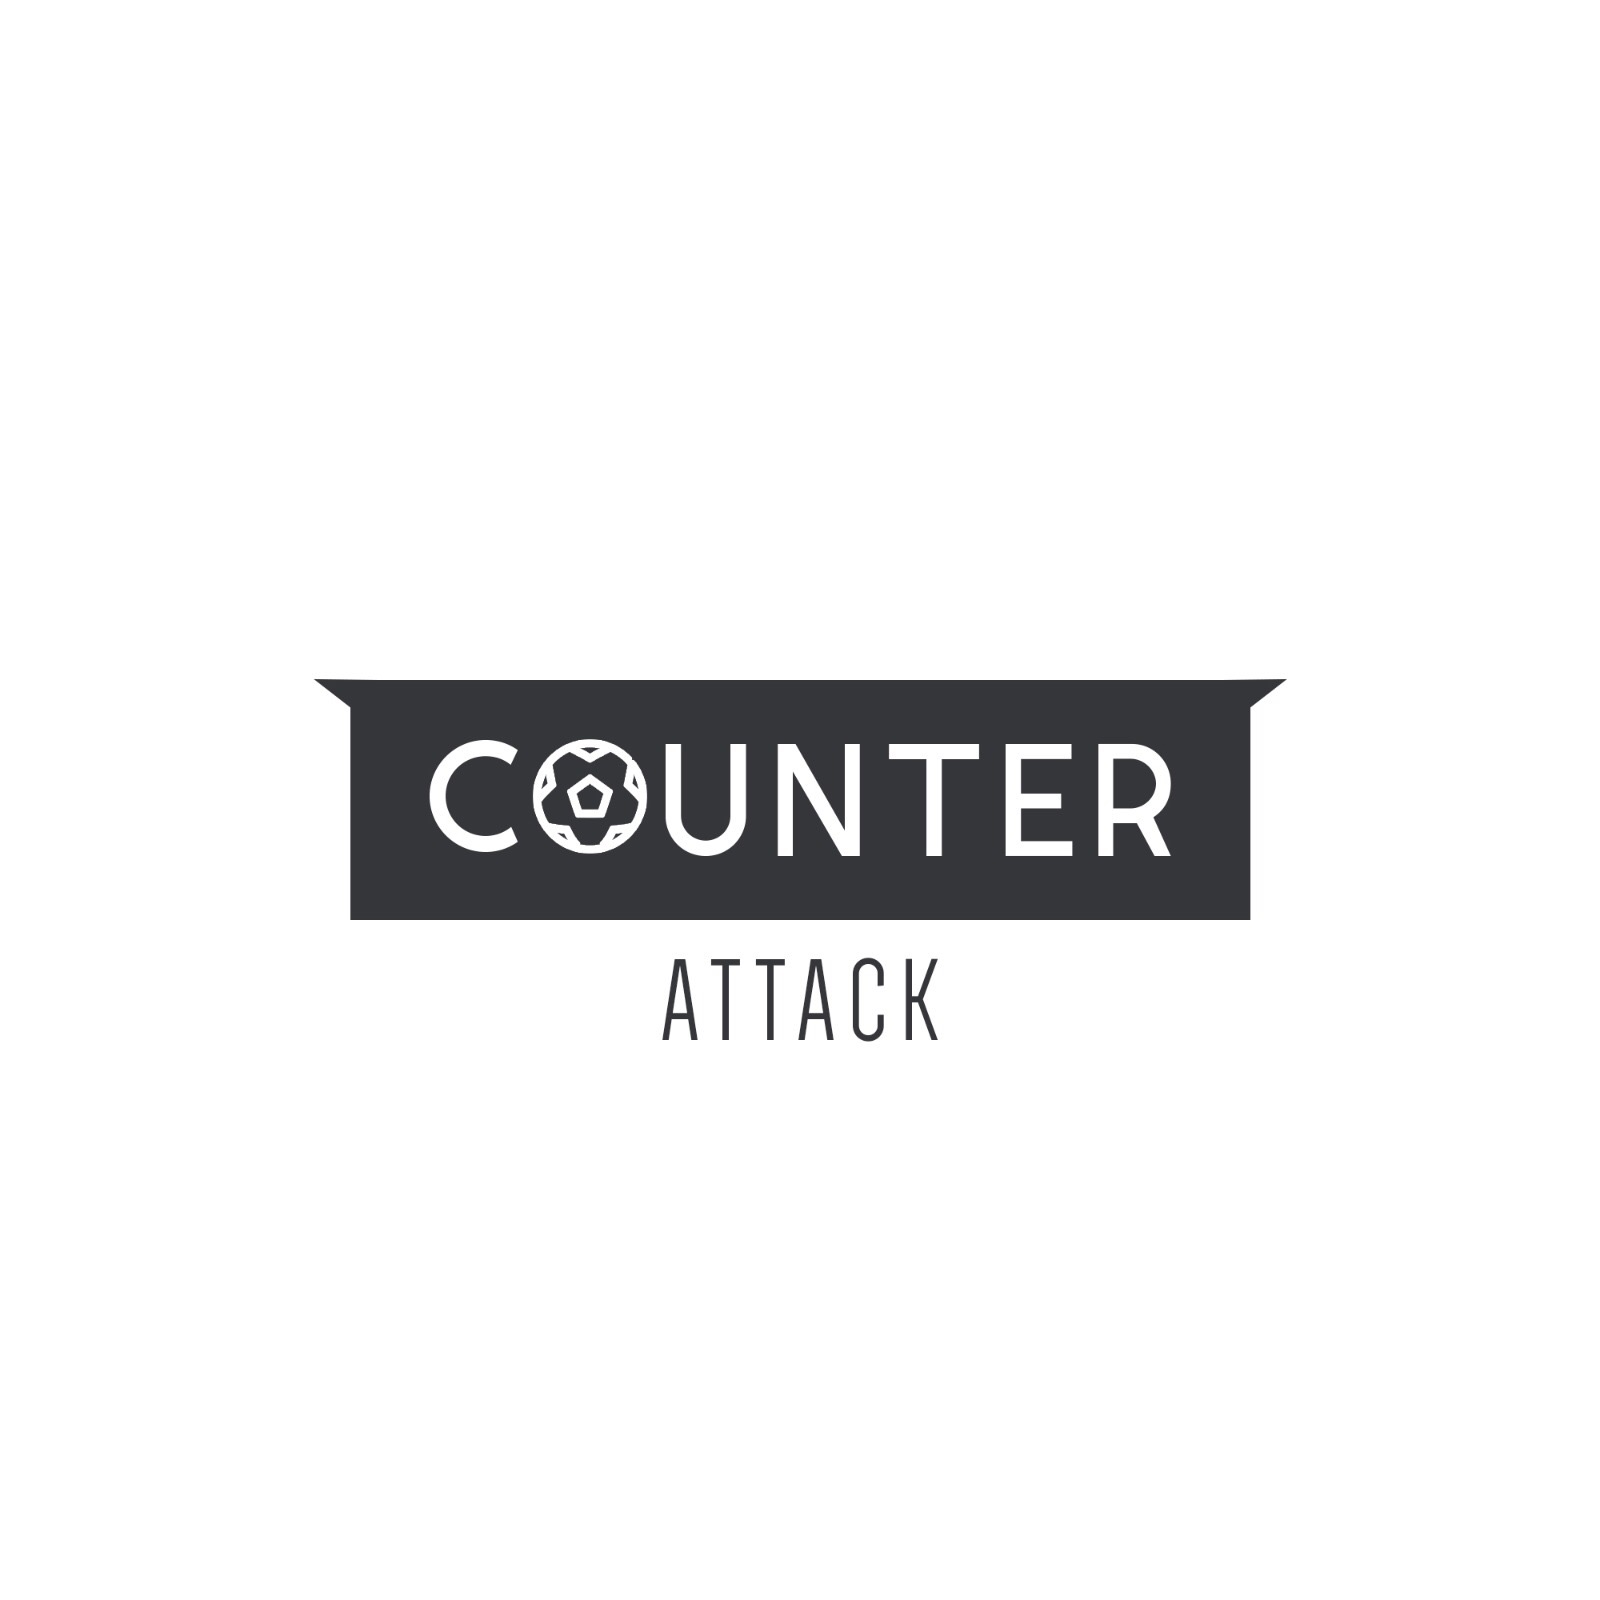 Counter Attack - Episode 85 - Did Pep Show Arrogance By Not Getting In Another CB?